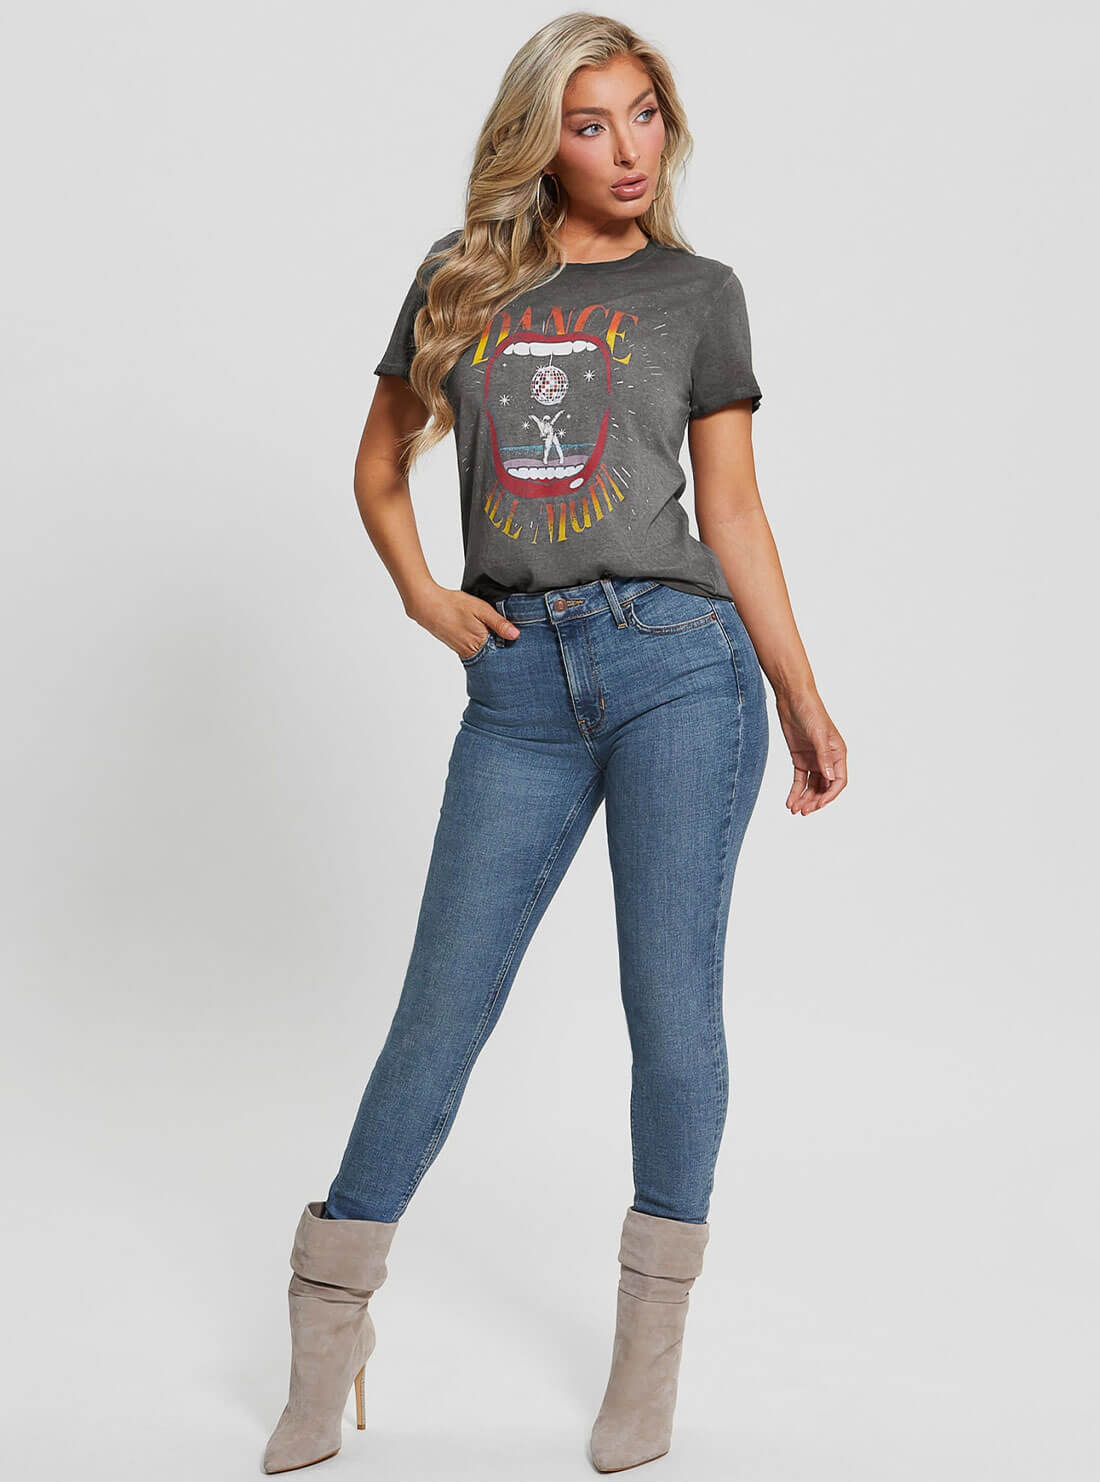 Grey Dance All Night Graphic T-Shirt | GUESS Women's Apparel | full view